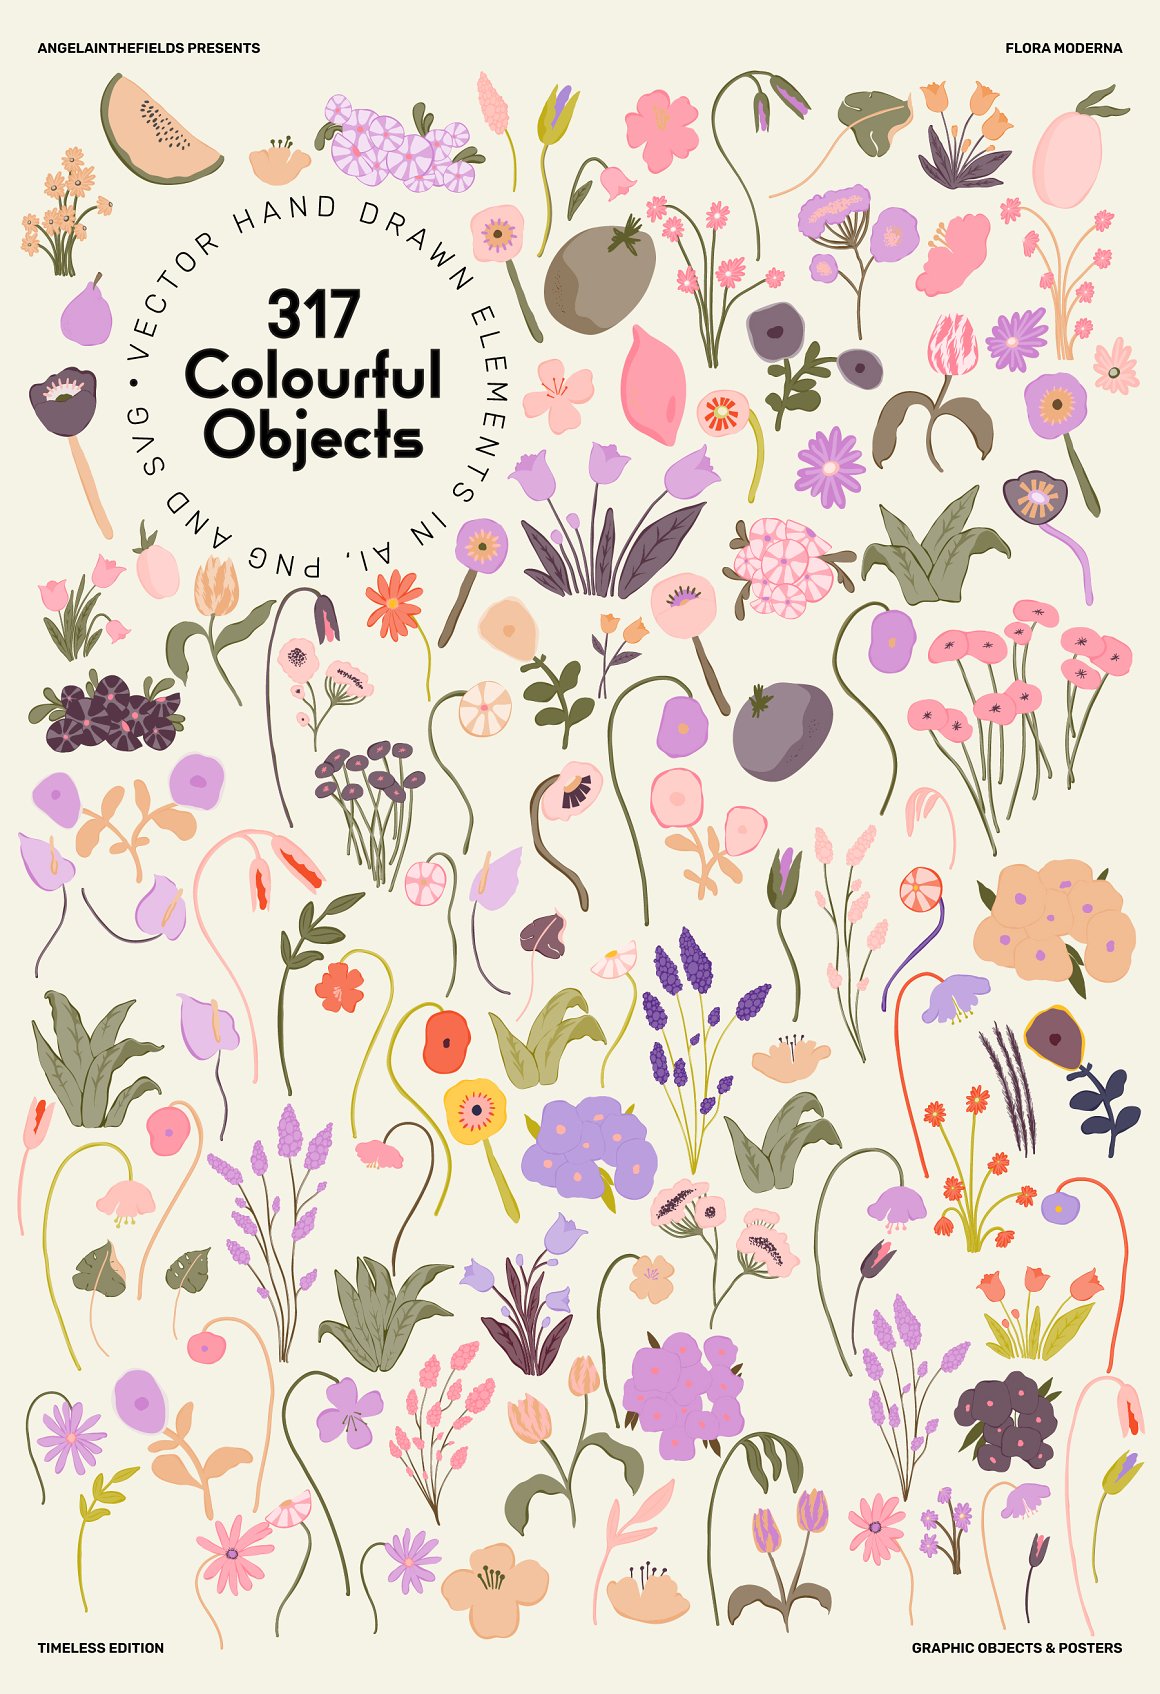 Bundle of 317 colorful illustrated elements.